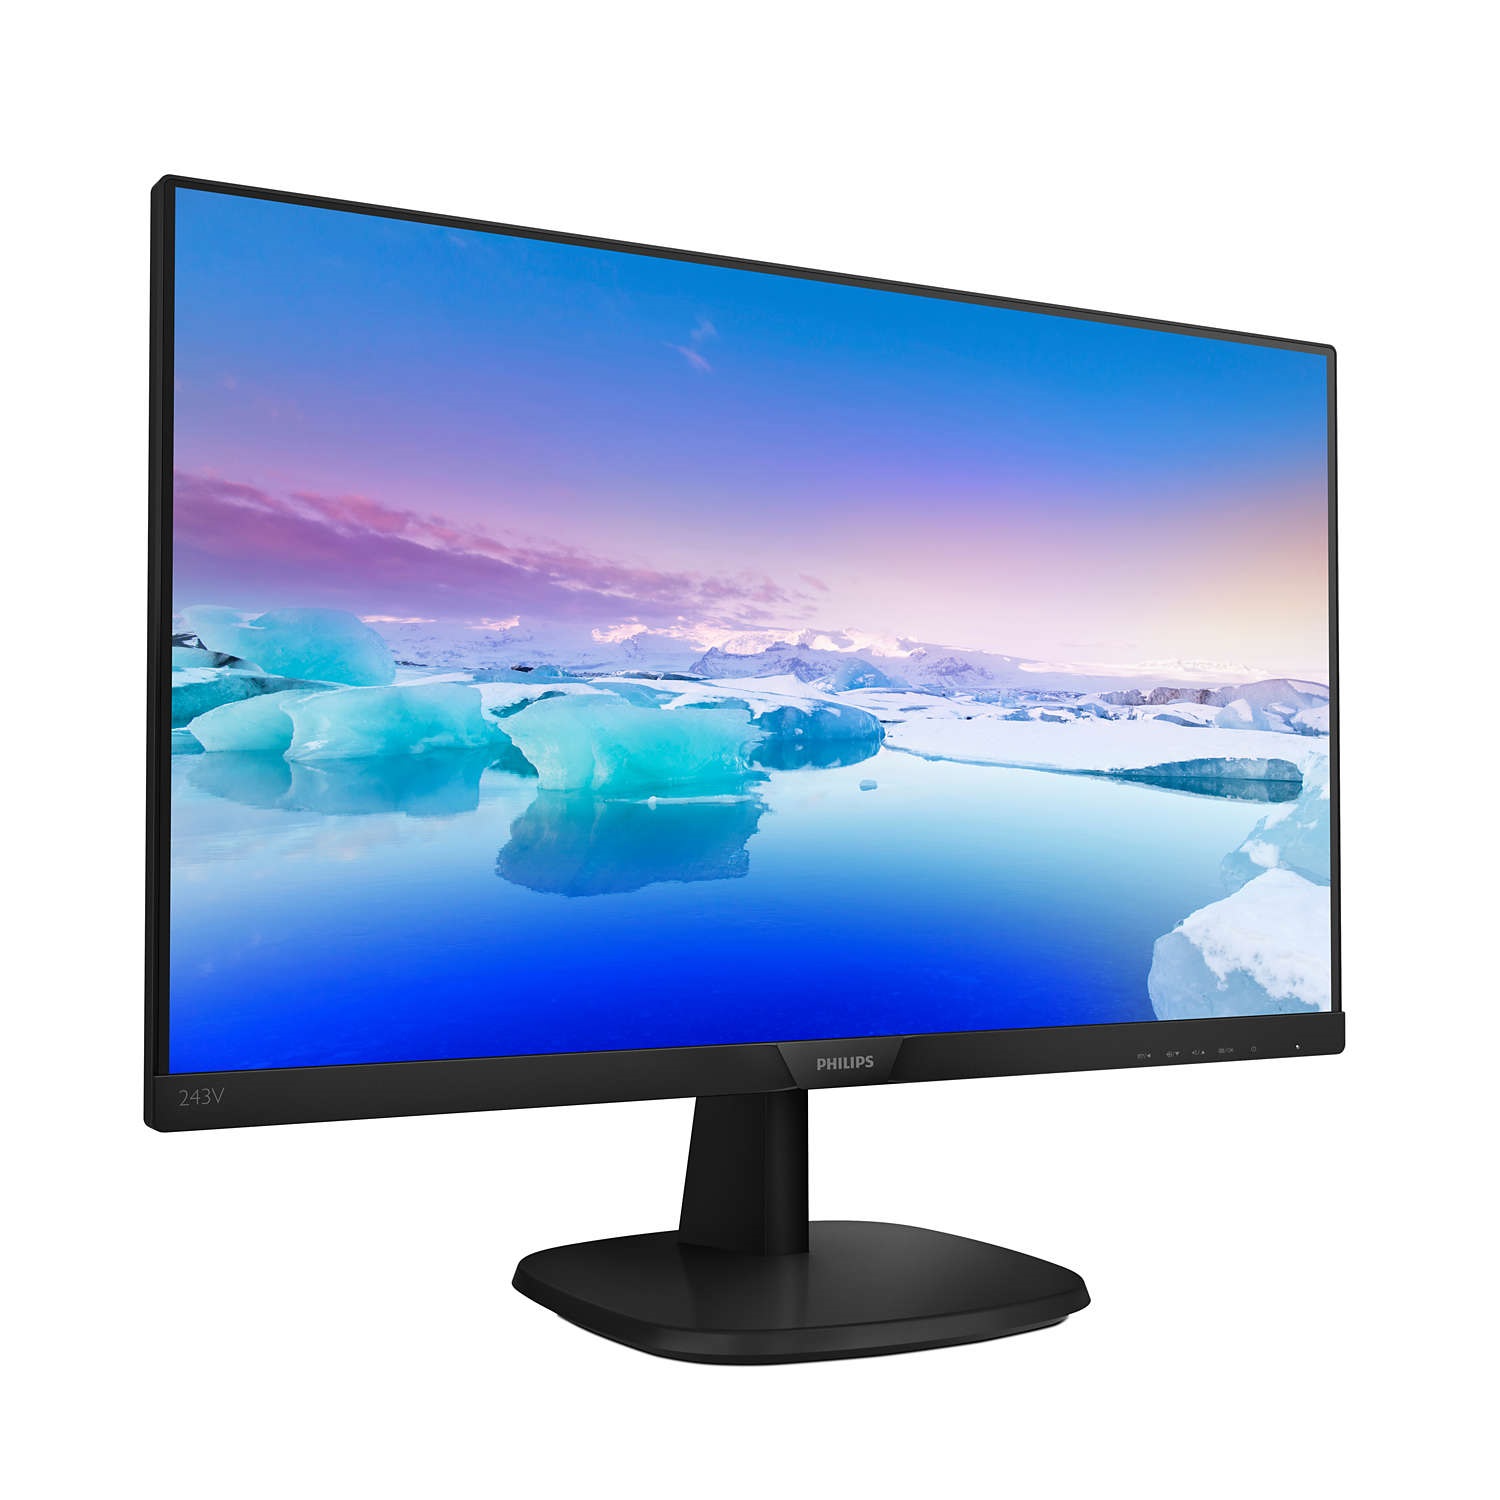 Philips 23.8" LCD Monitor with LED Backlight - image 1 of 8